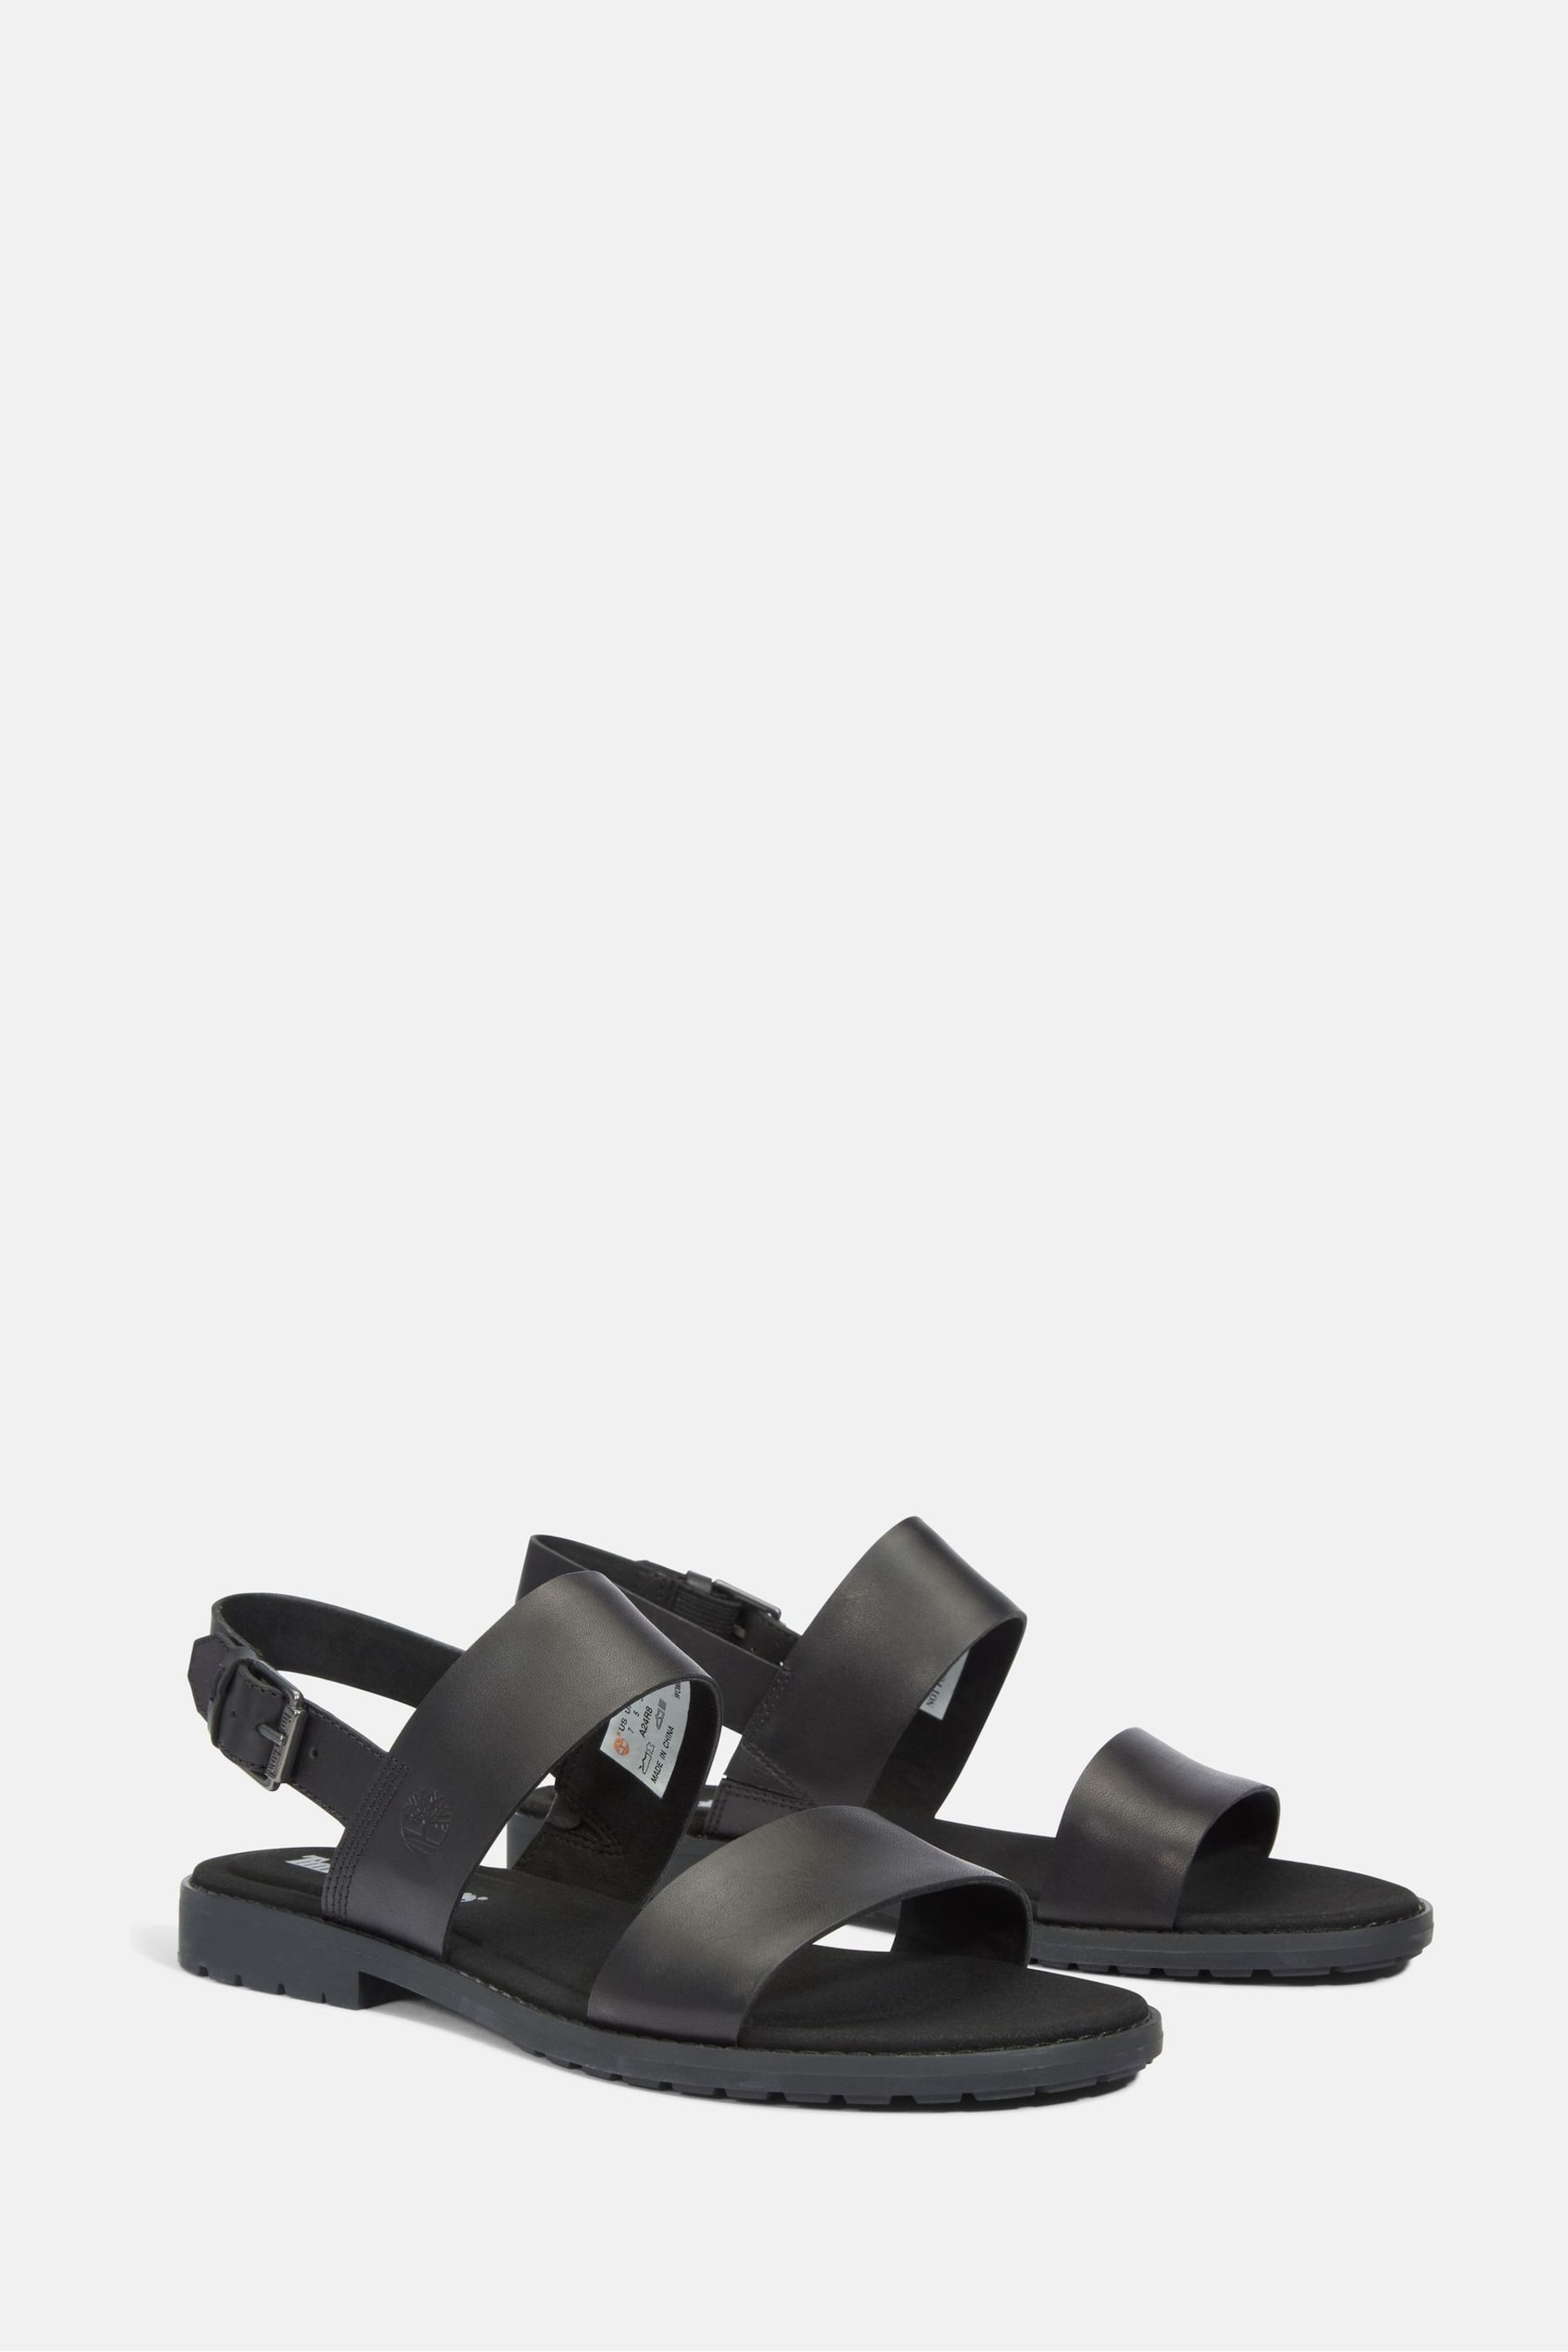 Timberland Black Chicago Riverside Two Band Sandals - Image 2 of 5